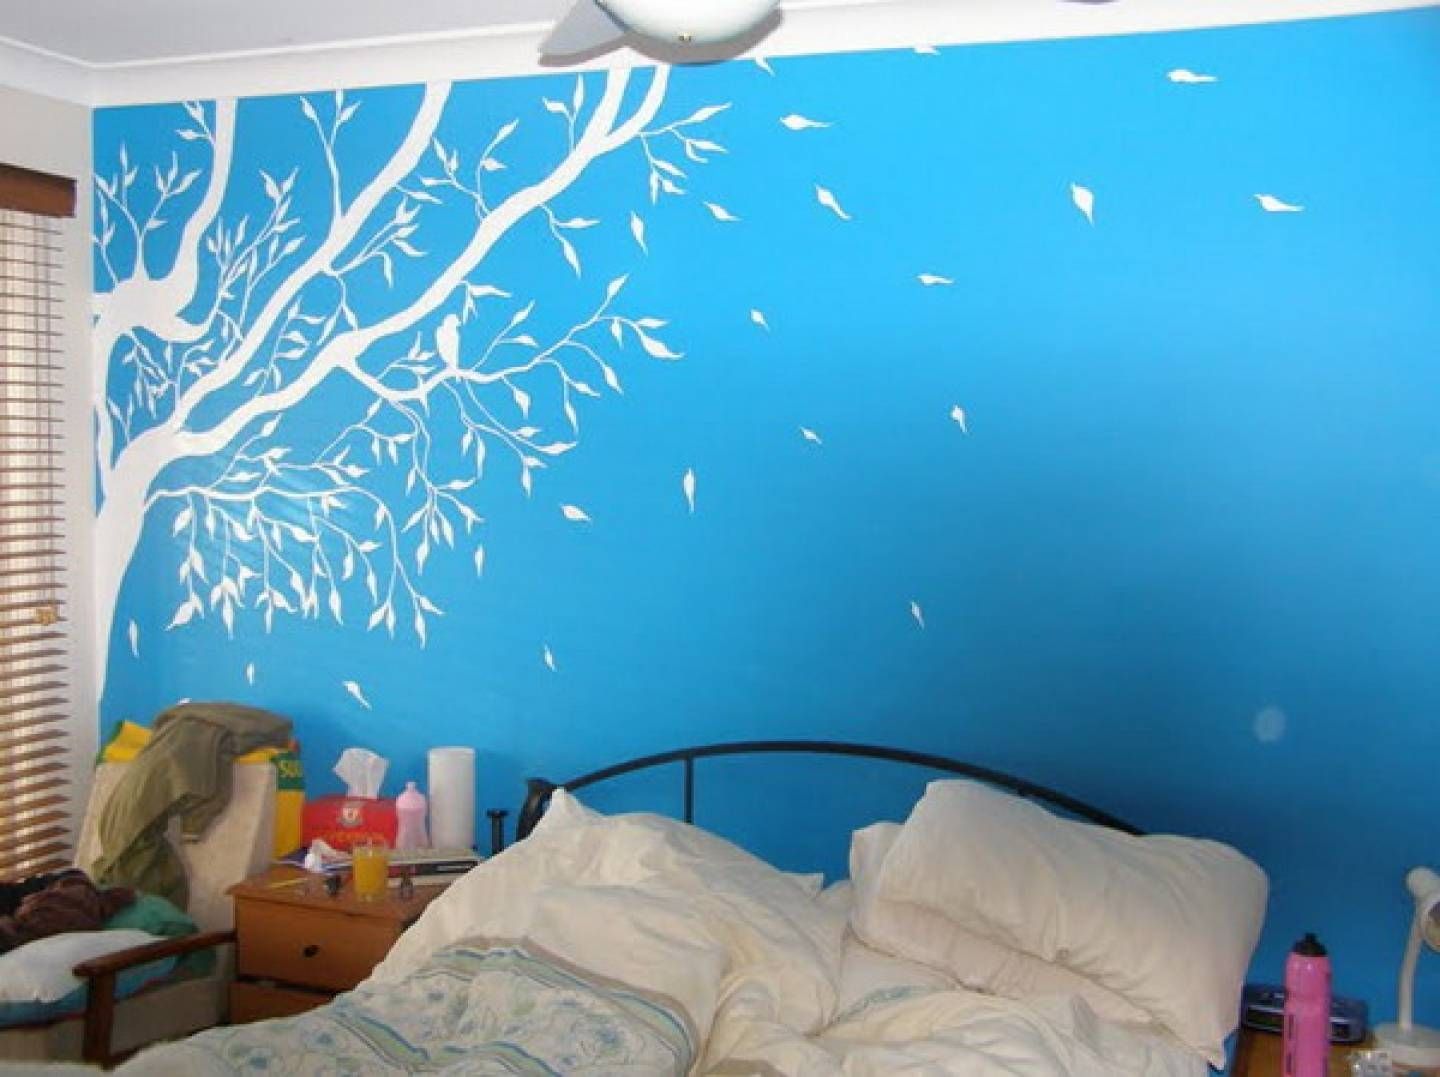 Wall Painting Ideas Blue Schemes Bedroom Blue Walls With White Within Most Up To Date Painted Trees Wall Art (View 19 of 20)